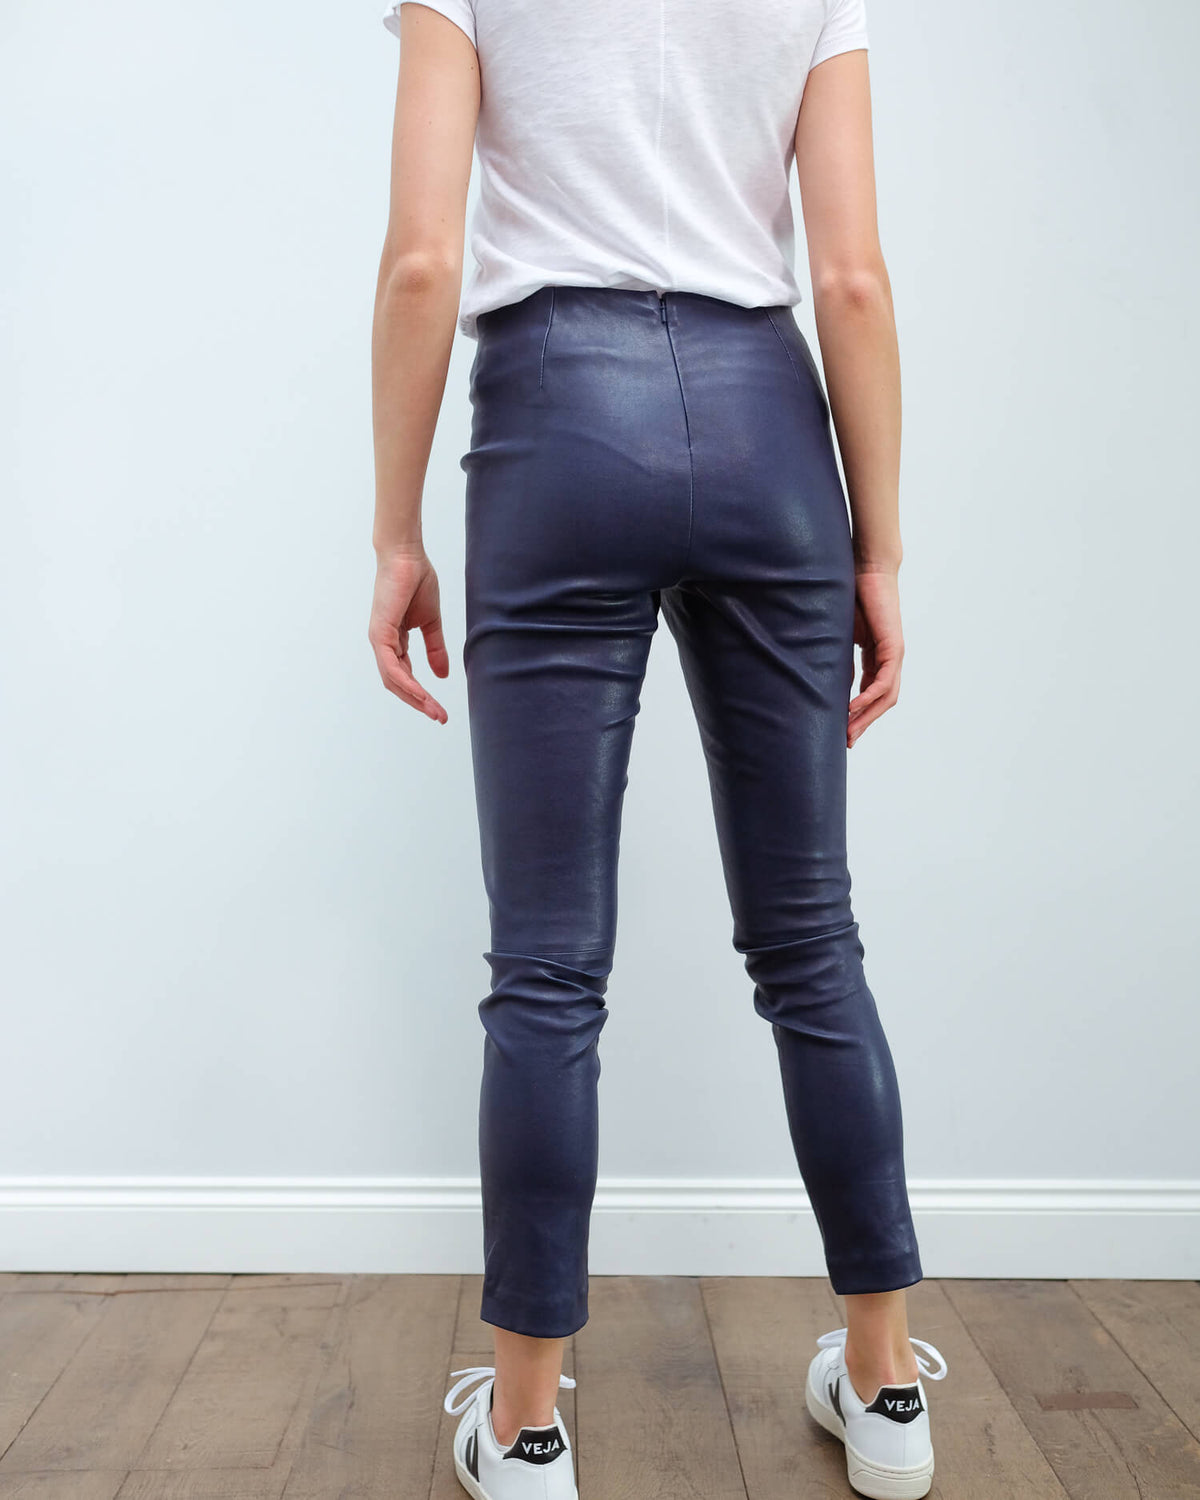 R&B Simone leather pant in royal blue